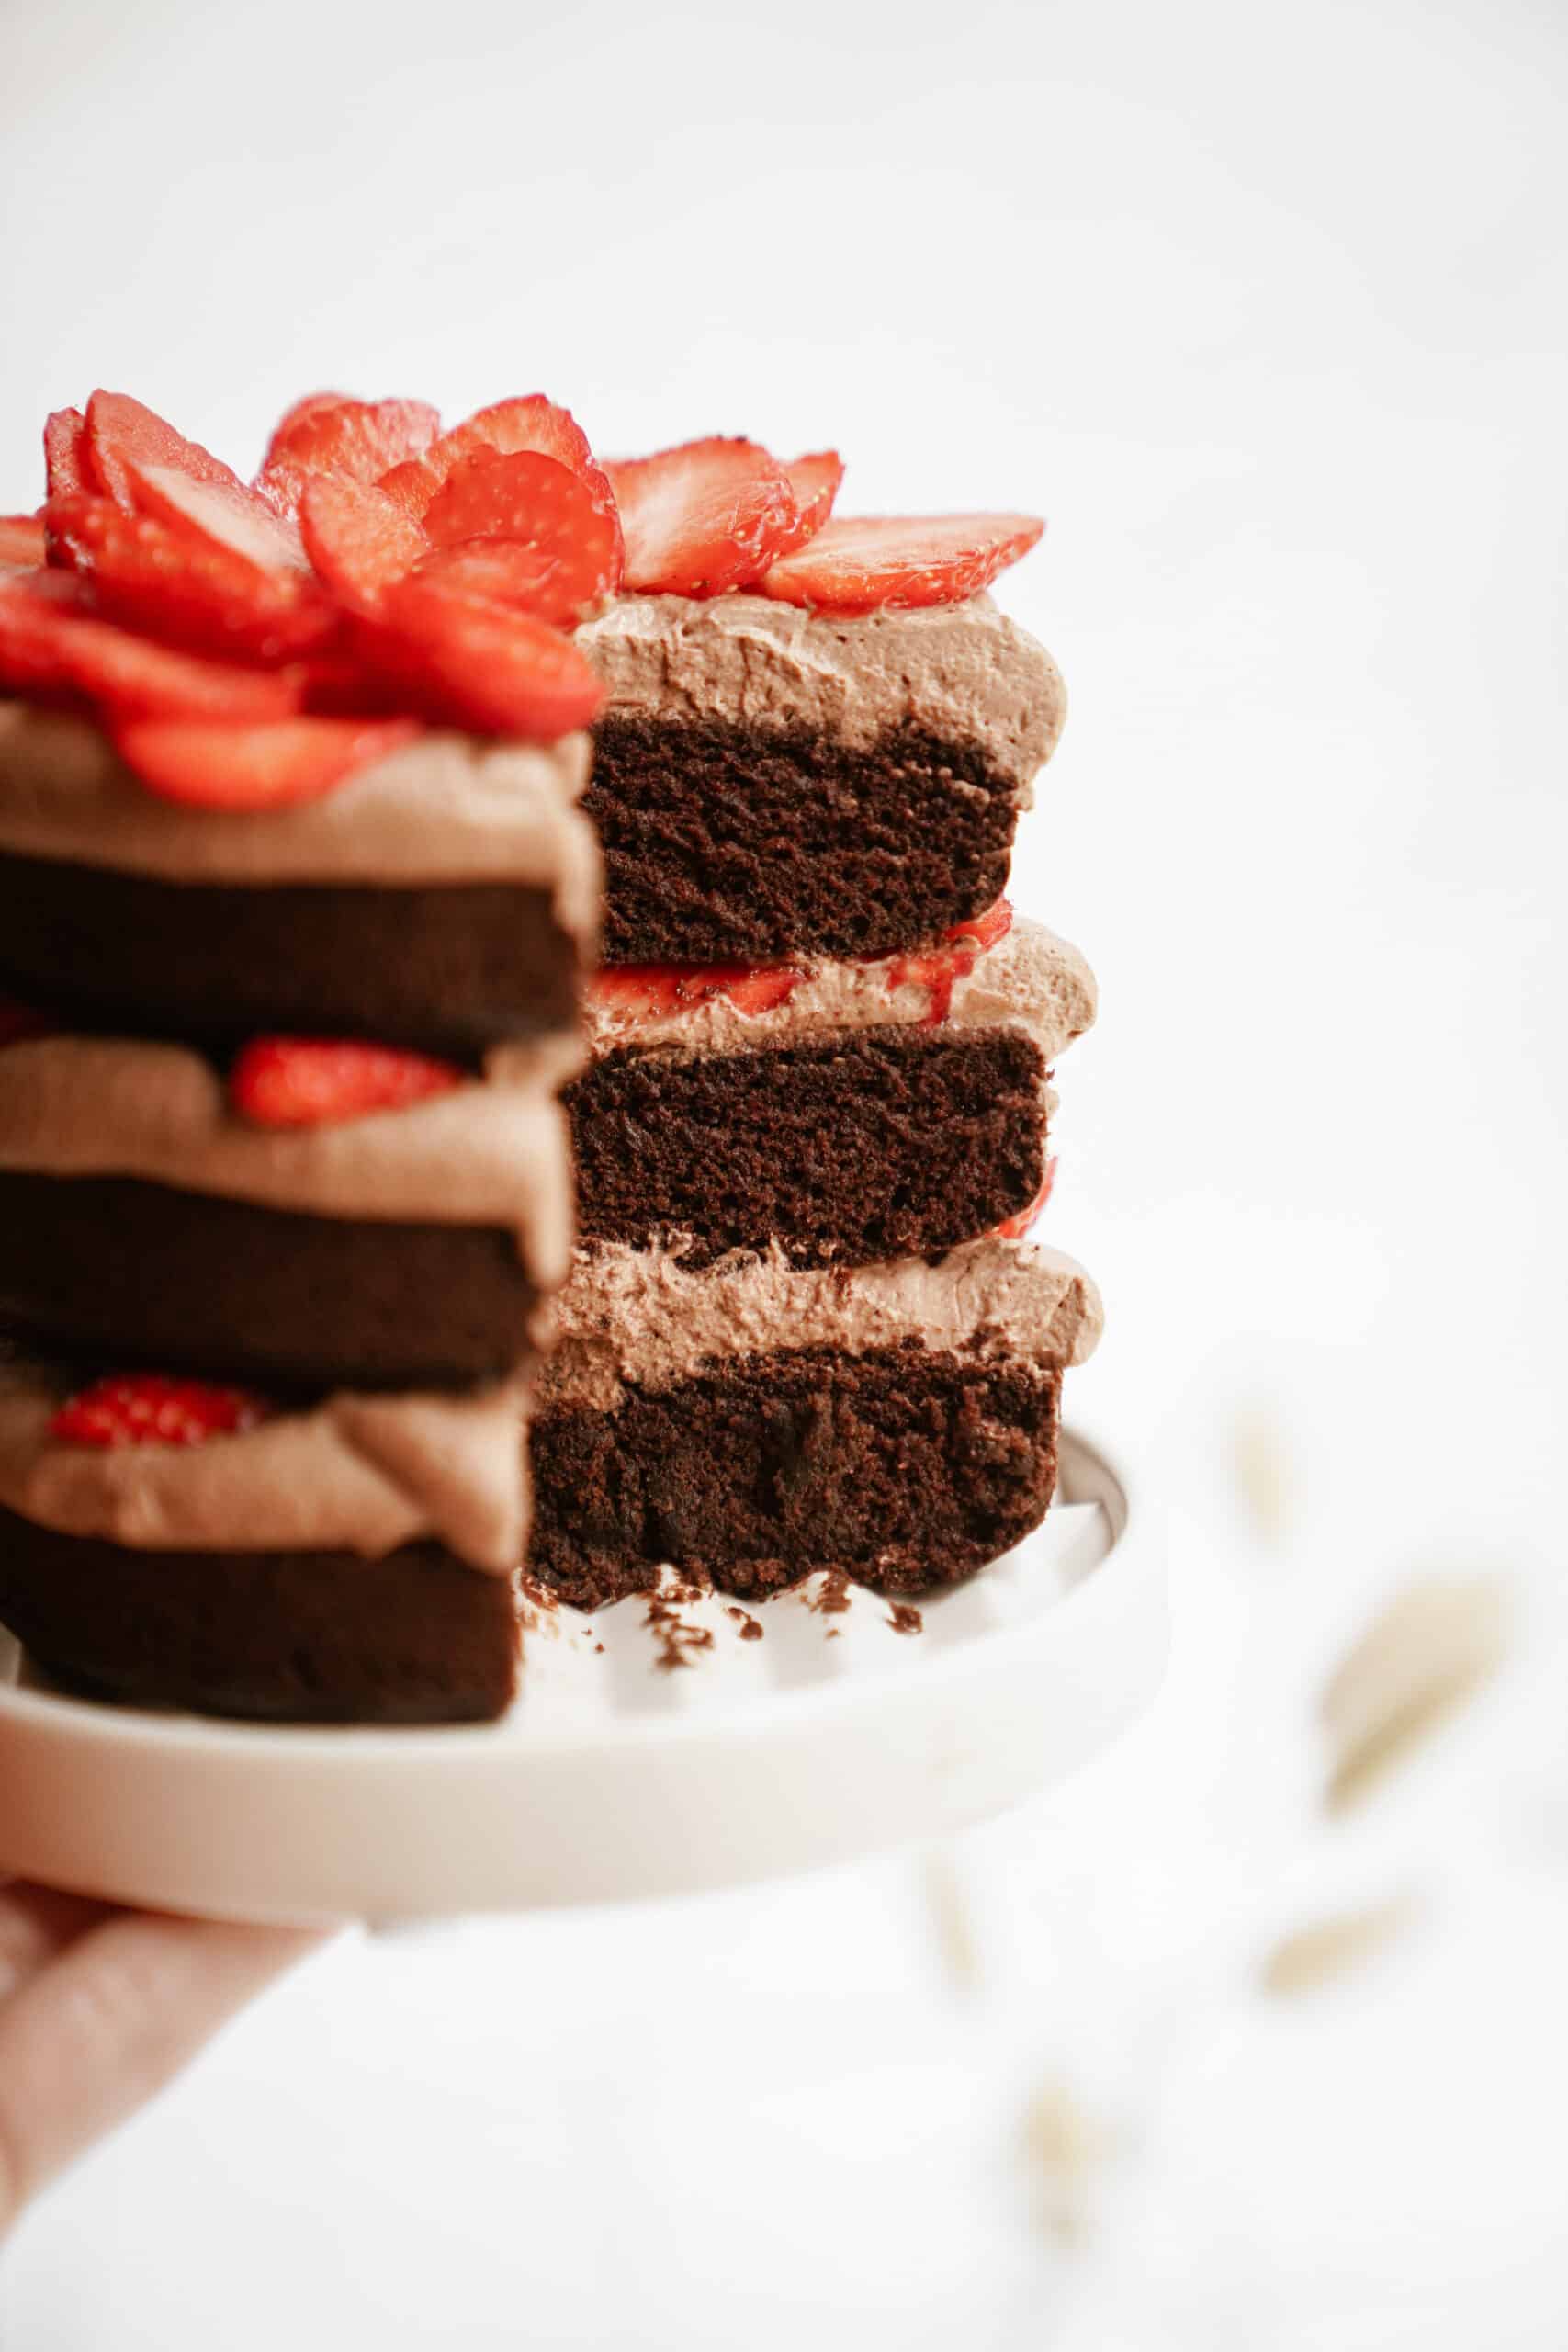 Gluten-free chocolate cake on a plate with a slice out of it